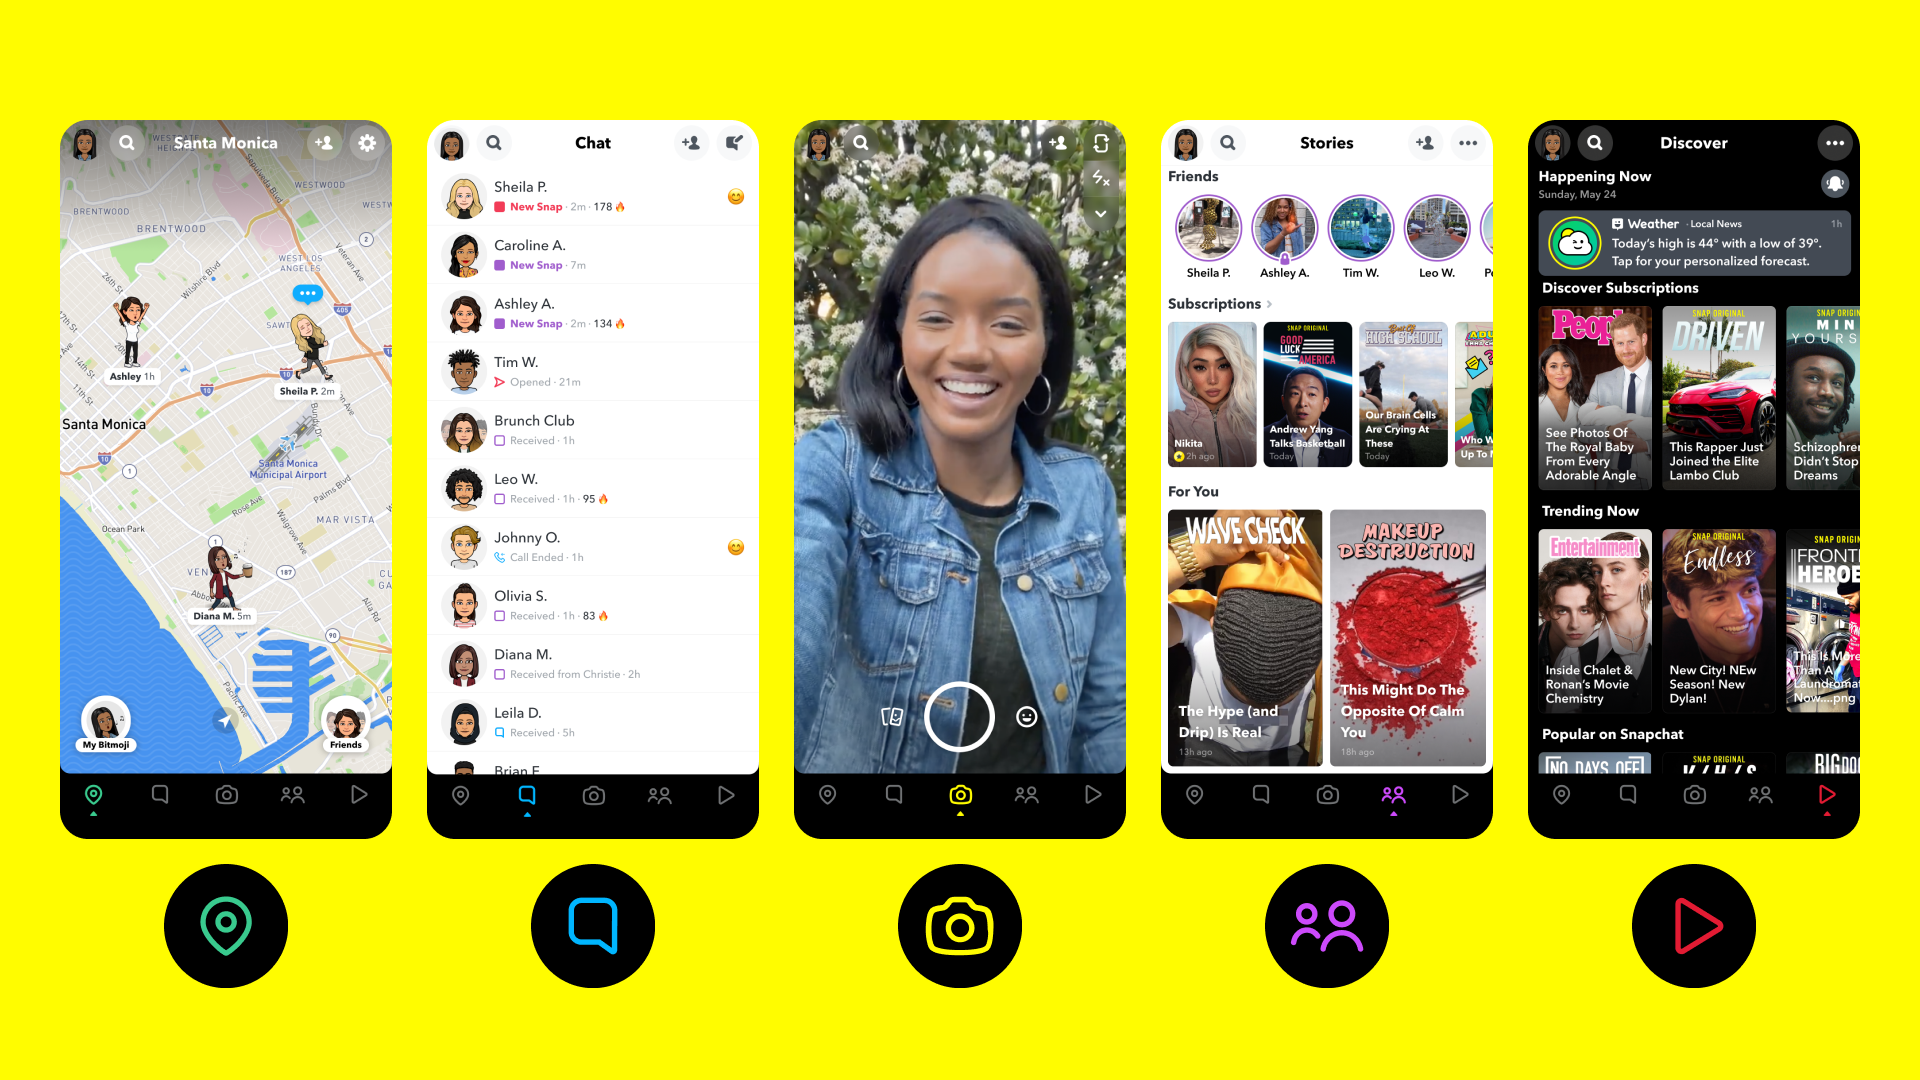 Snapchat redesigns its app with new action bar | TechCrunch